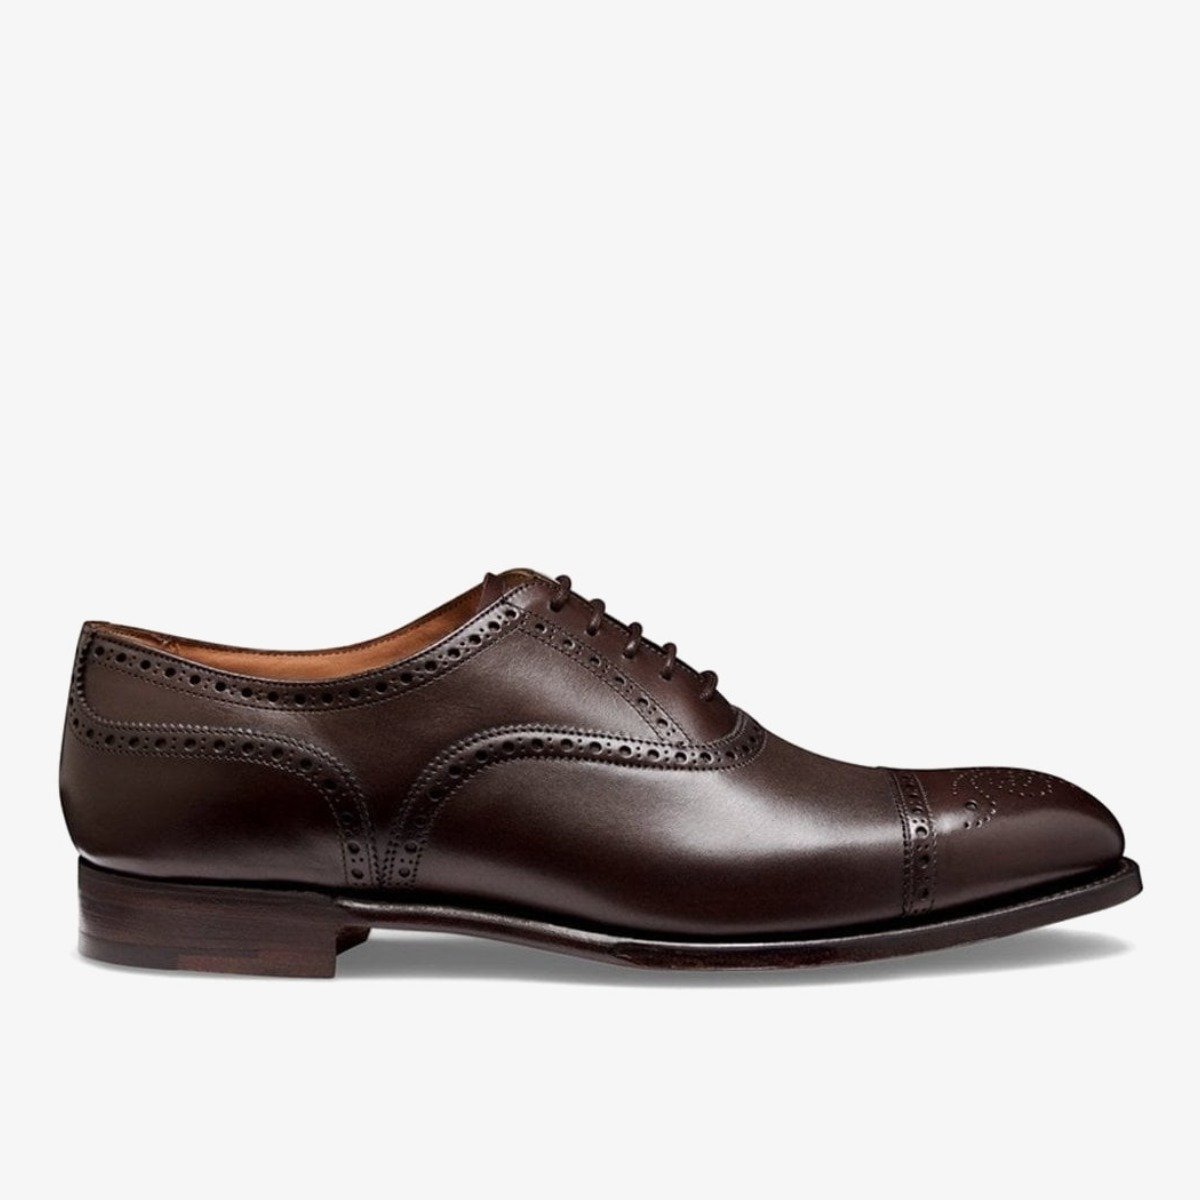 Cheaney Wilfred mocha brogue men's oxford shoes